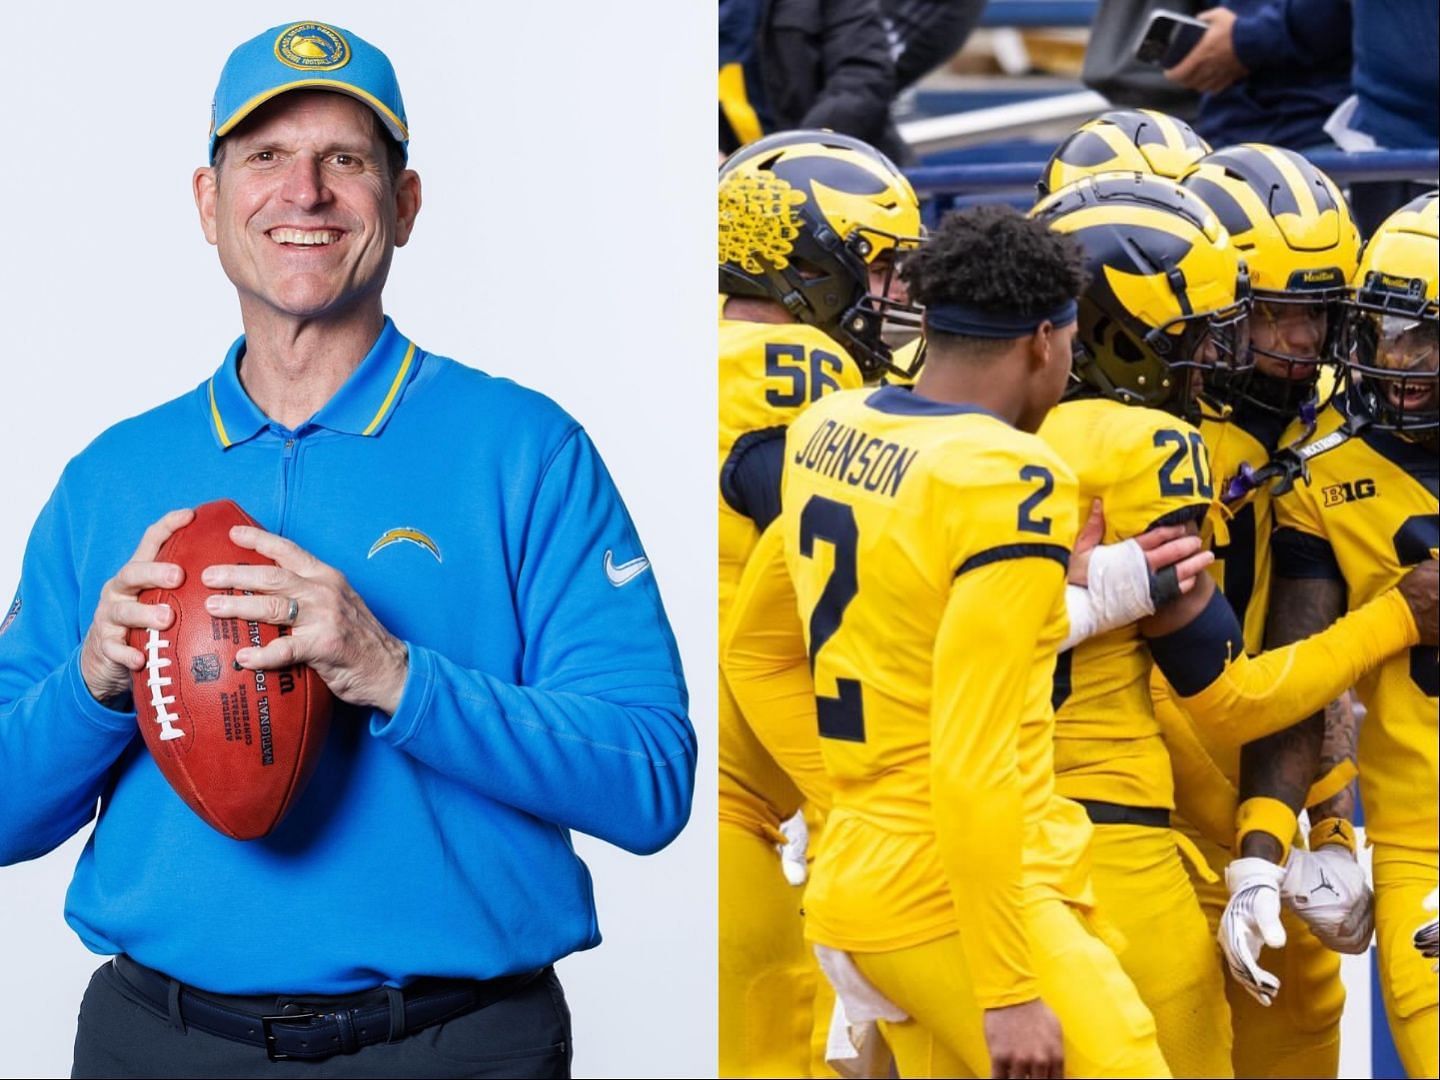 Jim Harbaugh and Michigan Players collage